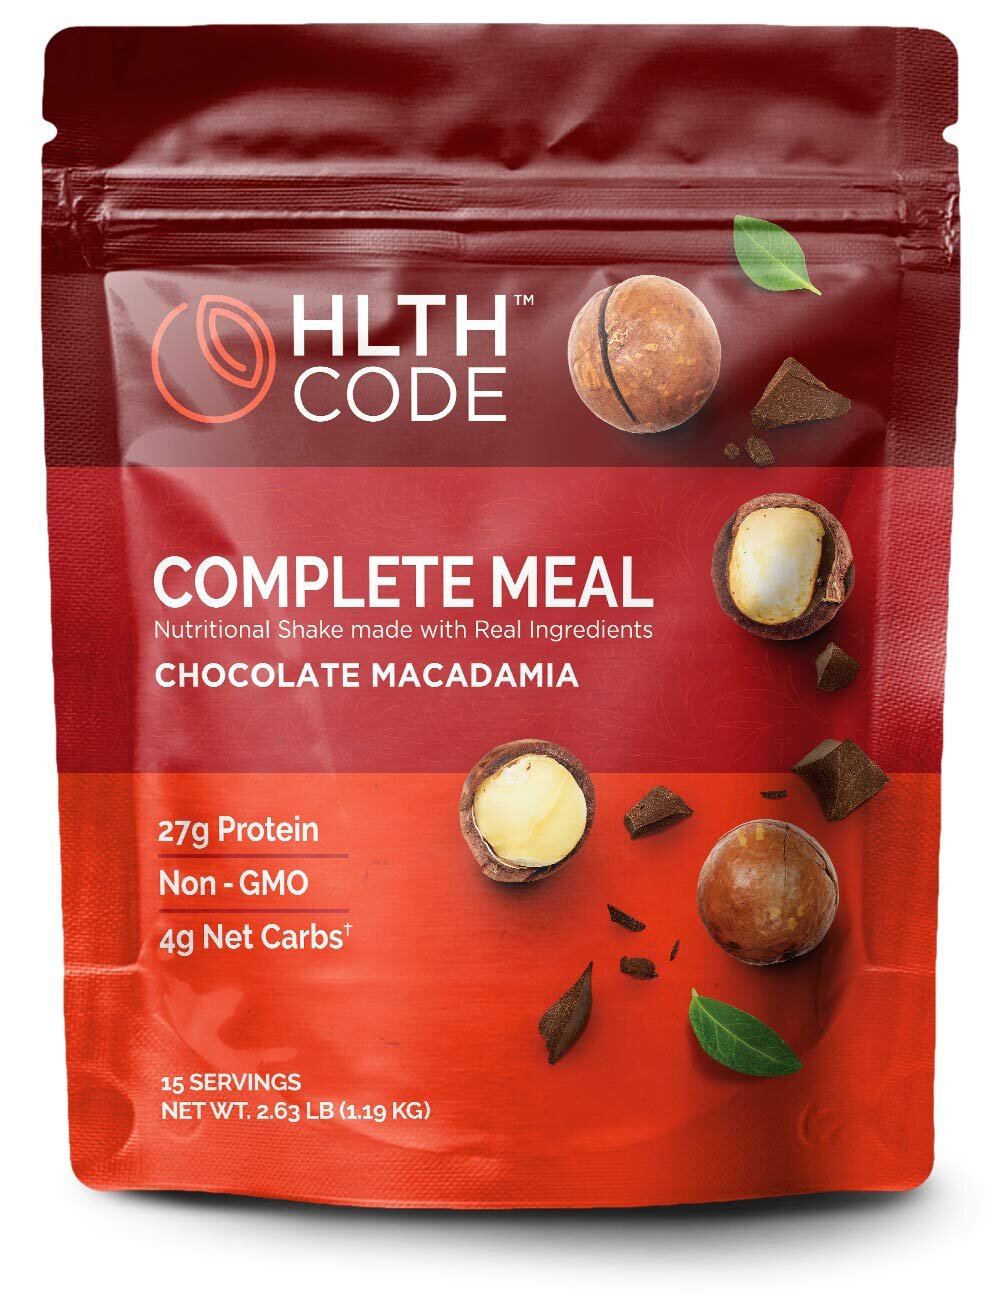 hlth code meal replacement shake chocolate macadamia (Copy)